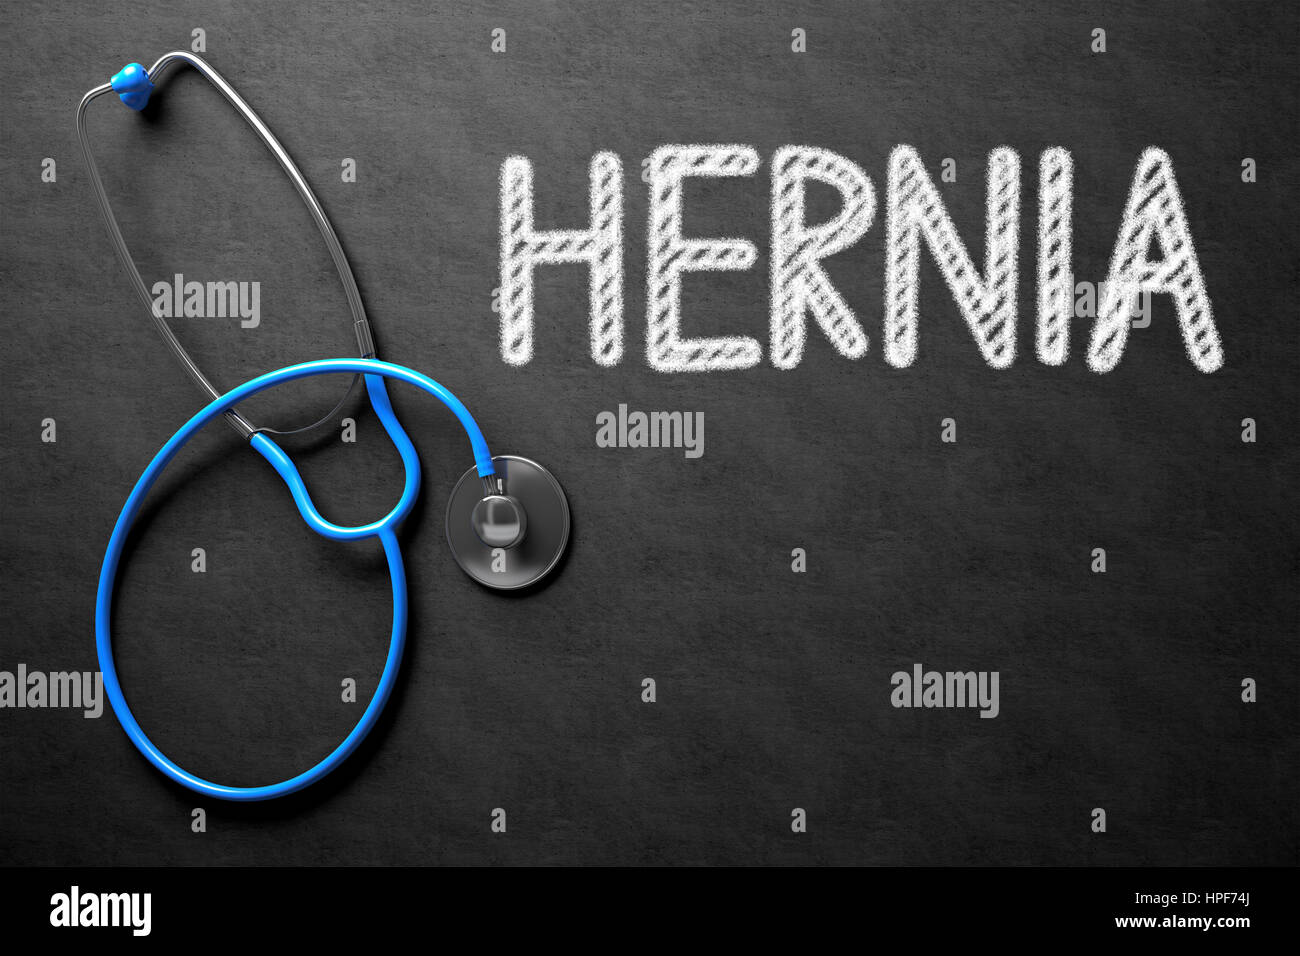 Medical Concept: Hernia Handwritten on Black Chalkboard. Top View of Blue Stethoscope on Chalkboard. Black Chalkboard with Hernia - Medical Concept. 3 Stock Photo